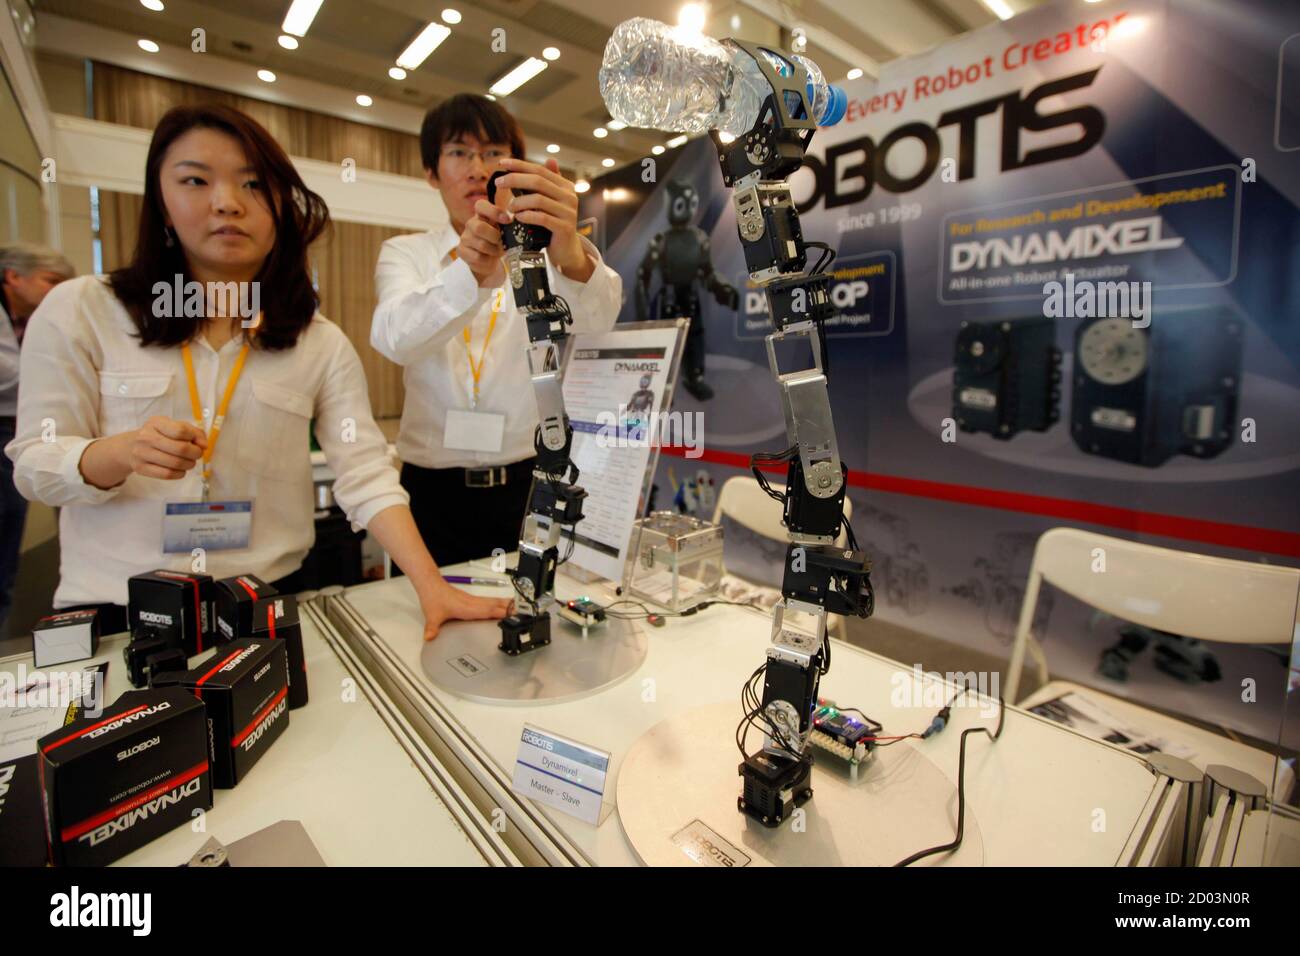 People look at a demonstration of a prototype pair of hand robots during the 2011 IEEE International Conference on Robotics and Automation (ICRA 2011) in Shanghai May 11, 2011. The theme of the conference is 'Better Robots, Better Life' and it runs from May 9-13. REUTERS/Aly Song  (CHINA - Tags: SOCIETY SCI TECH) Stock Photo